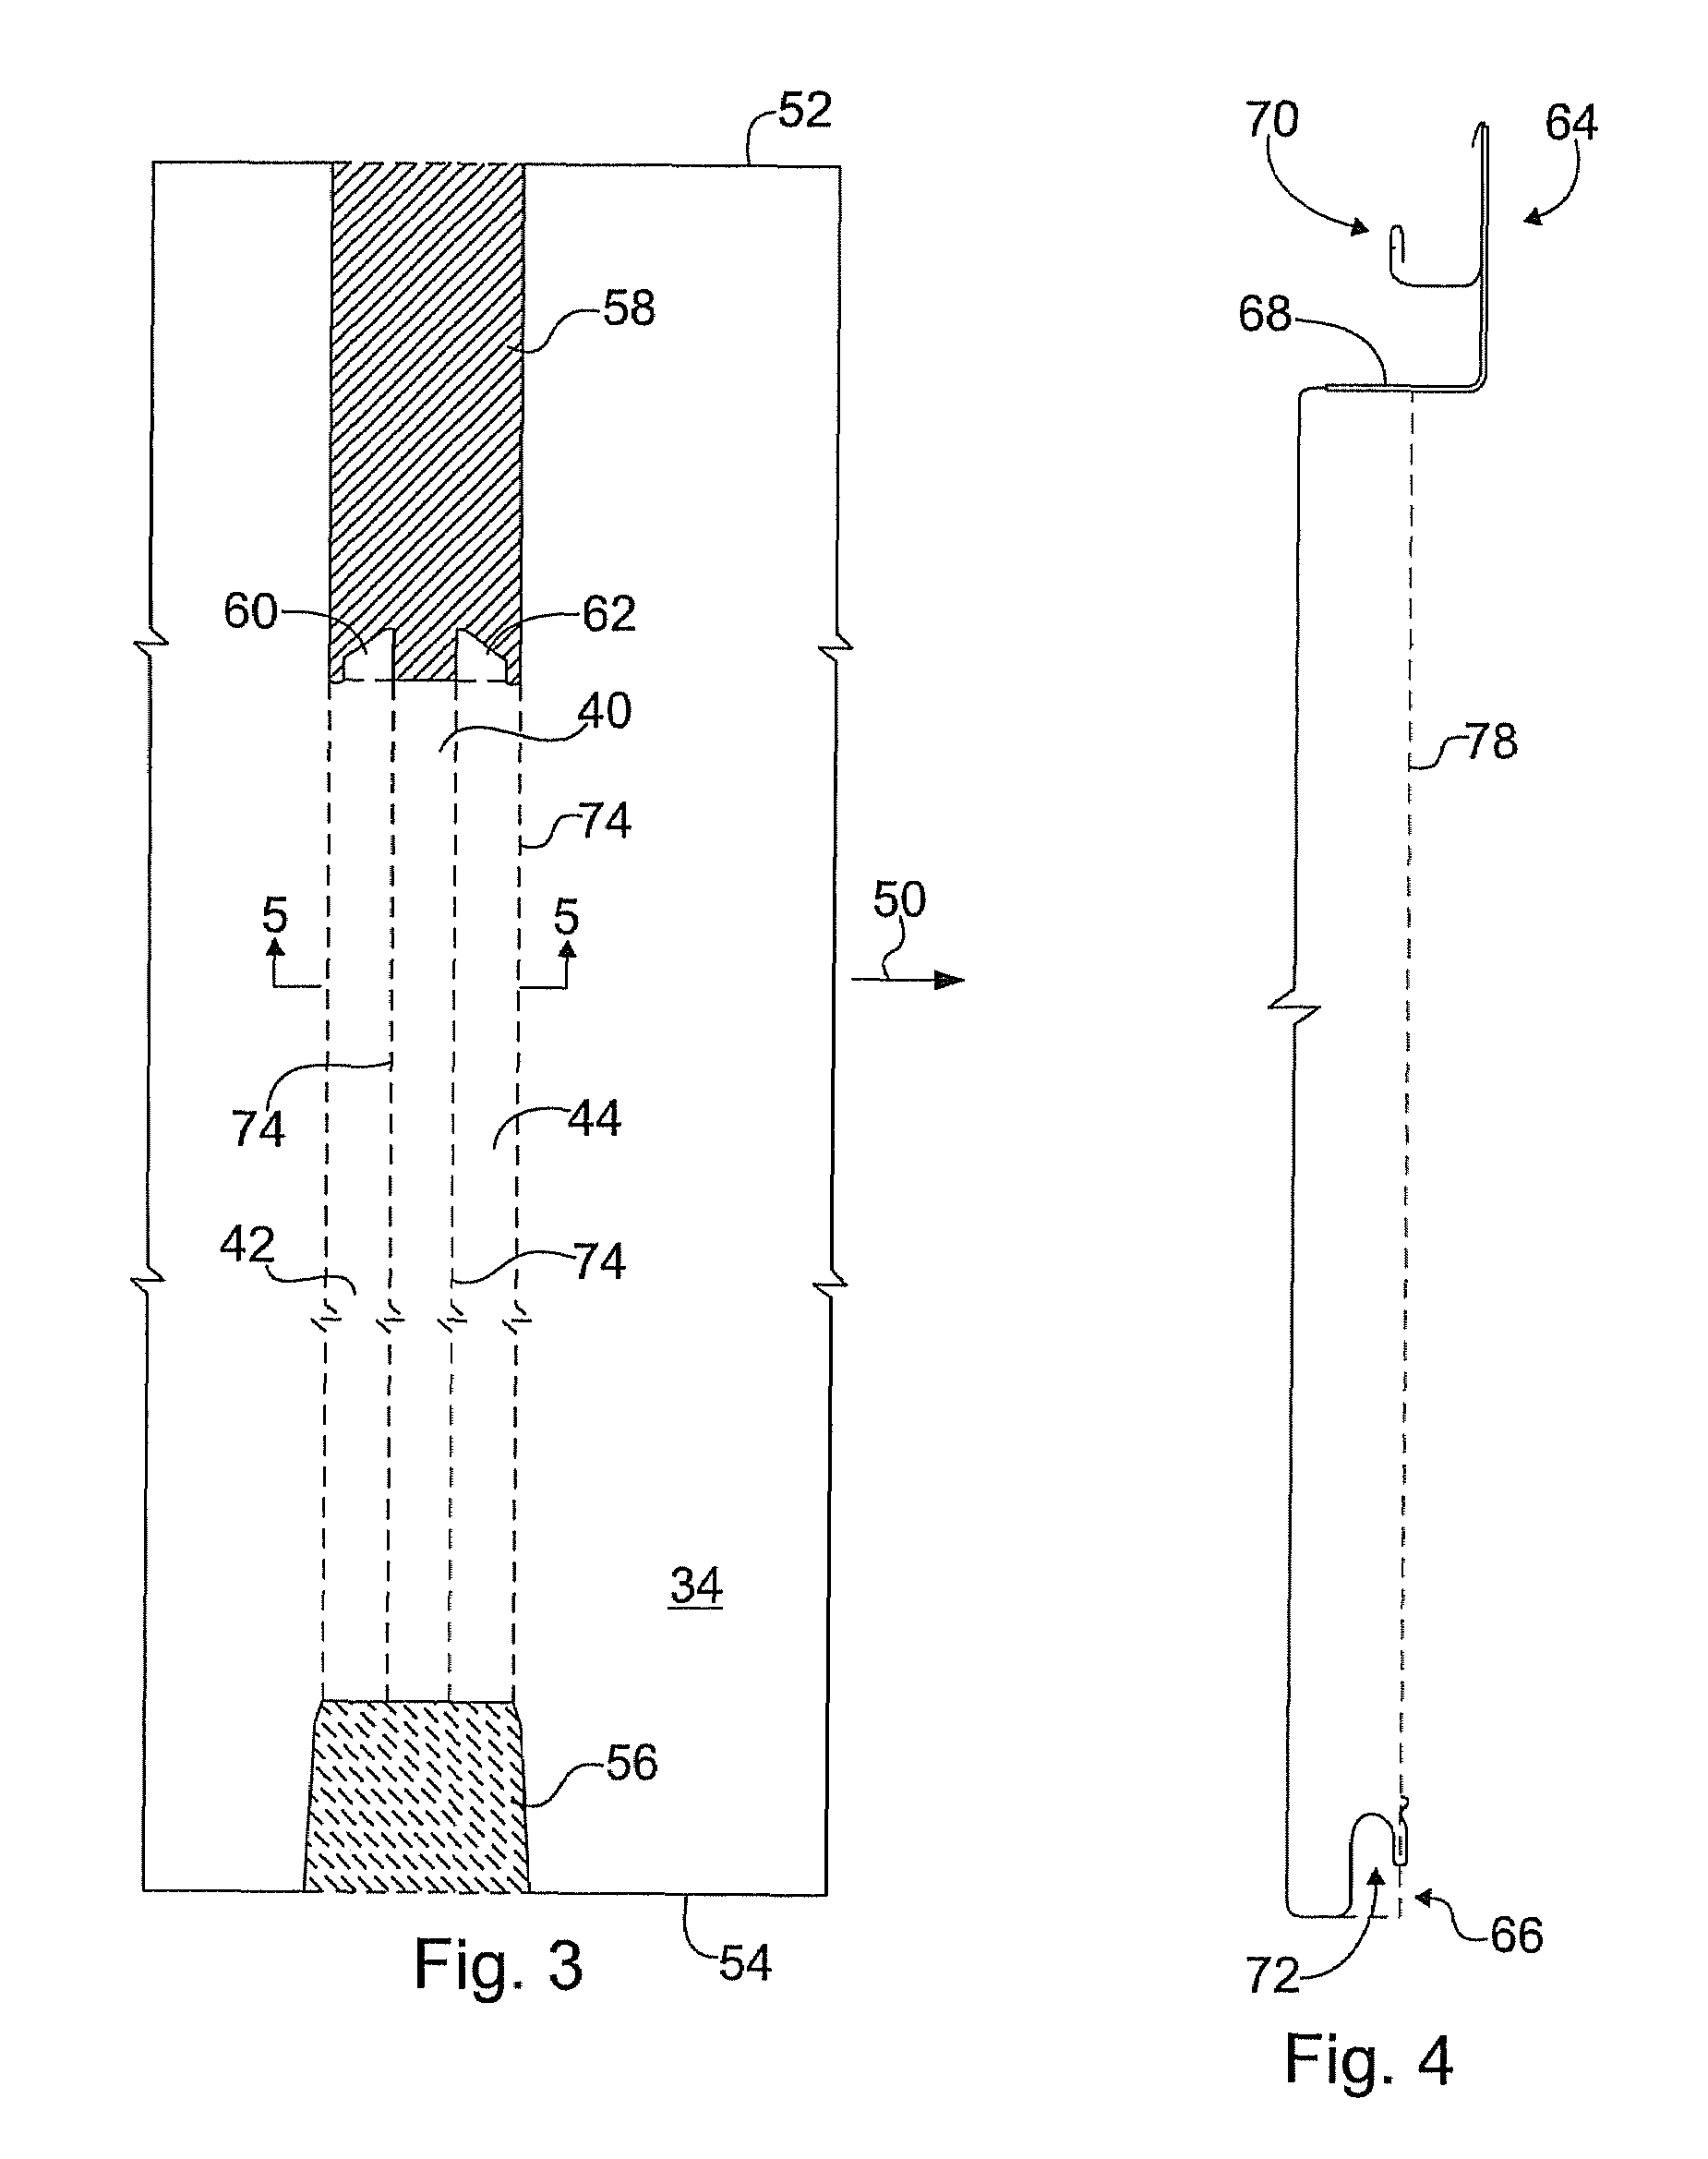 Method for making segmented composite panel with false joints